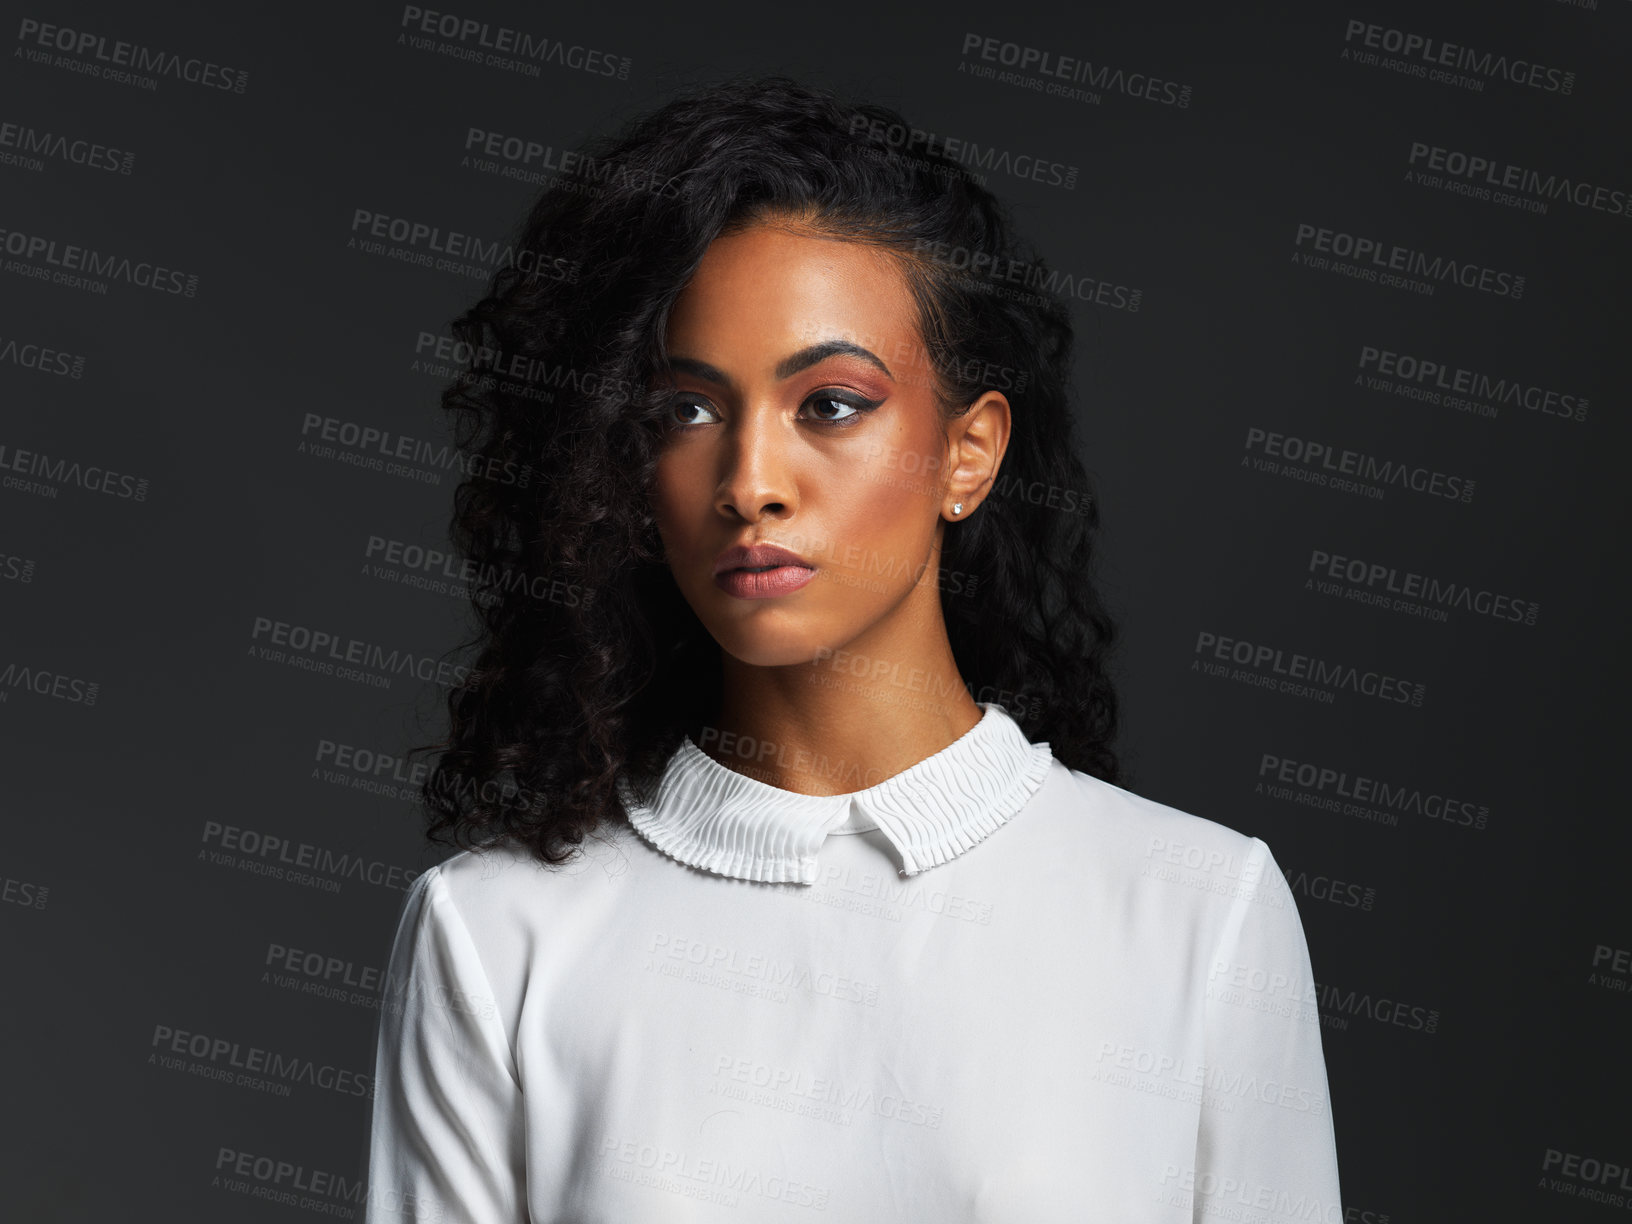 Buy stock photo Studio shot of an attractive young woman wearing a white blouse and posing alone against a dark background